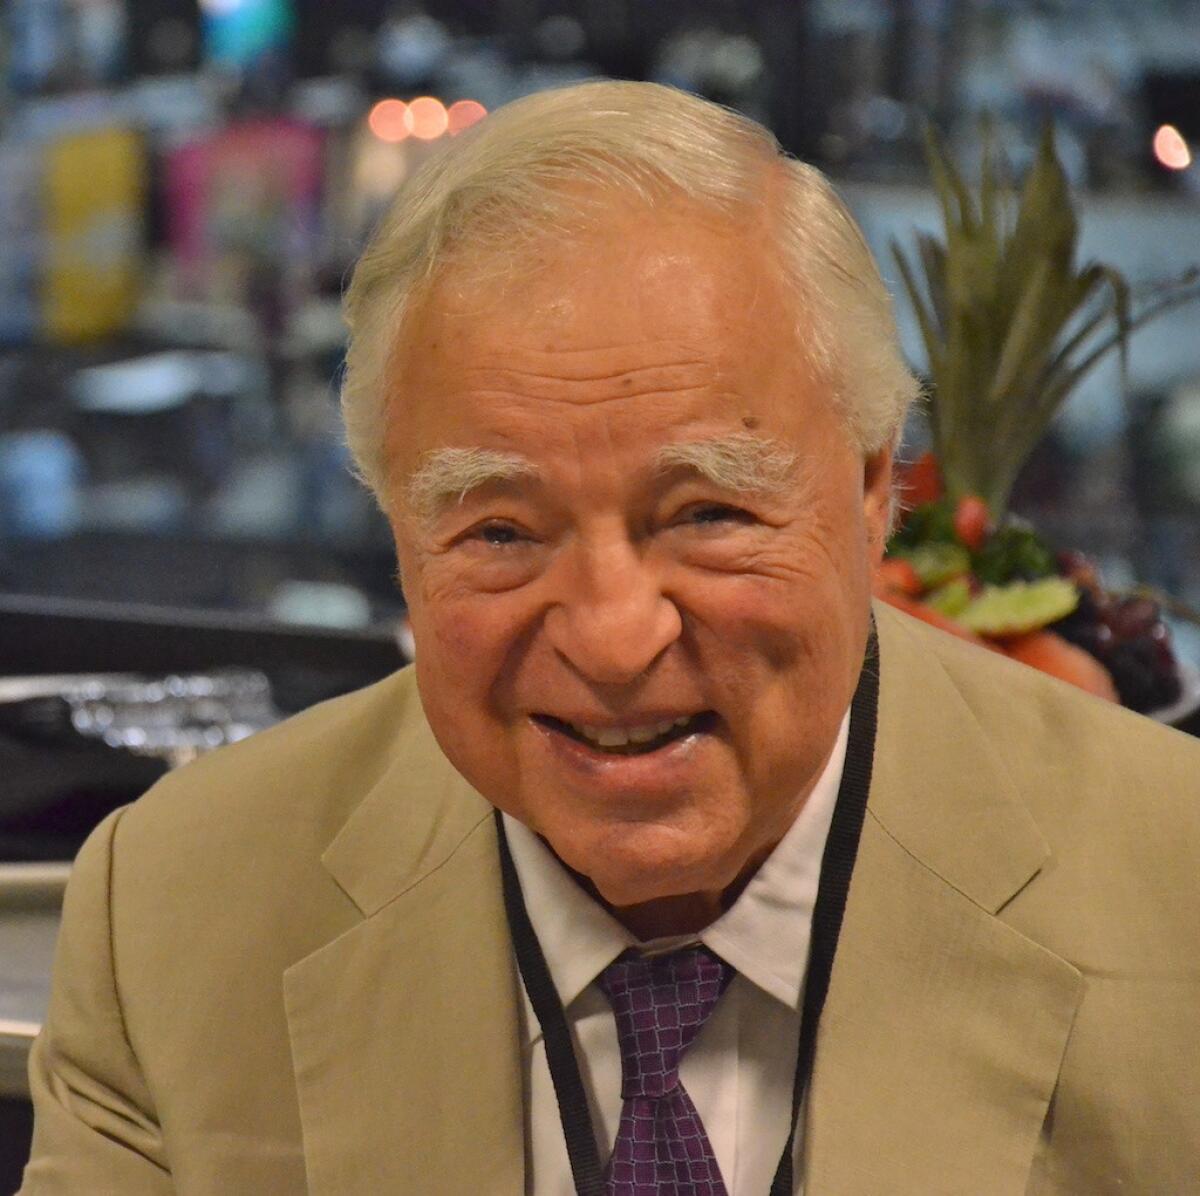 Arthur Frommer will speak at the Los Angeles Times Travel Show at 11 a.m. Saturday.